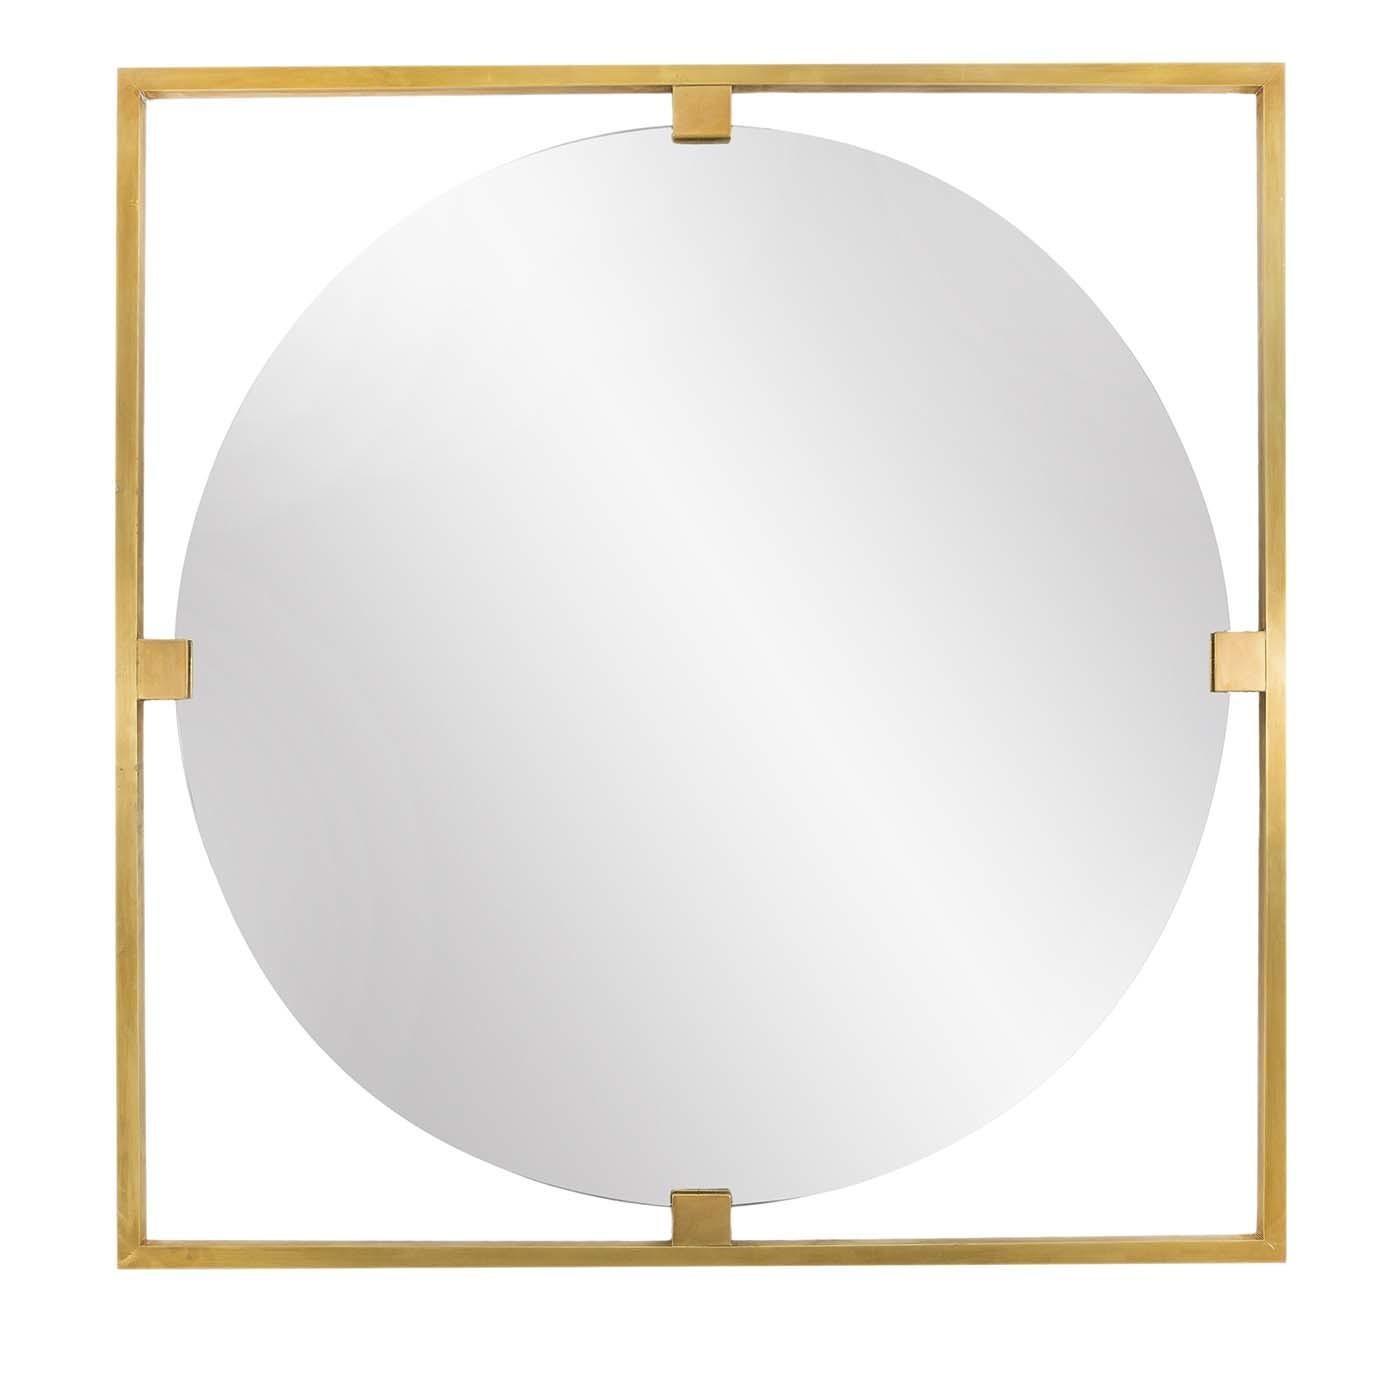 This stunning object of functional decor will add a superb accent on a wall in a powder room, bedroom, or entryway. This magnificent design combines rigorous geometric shapes and a minimalist design, combined with traditional materials for a